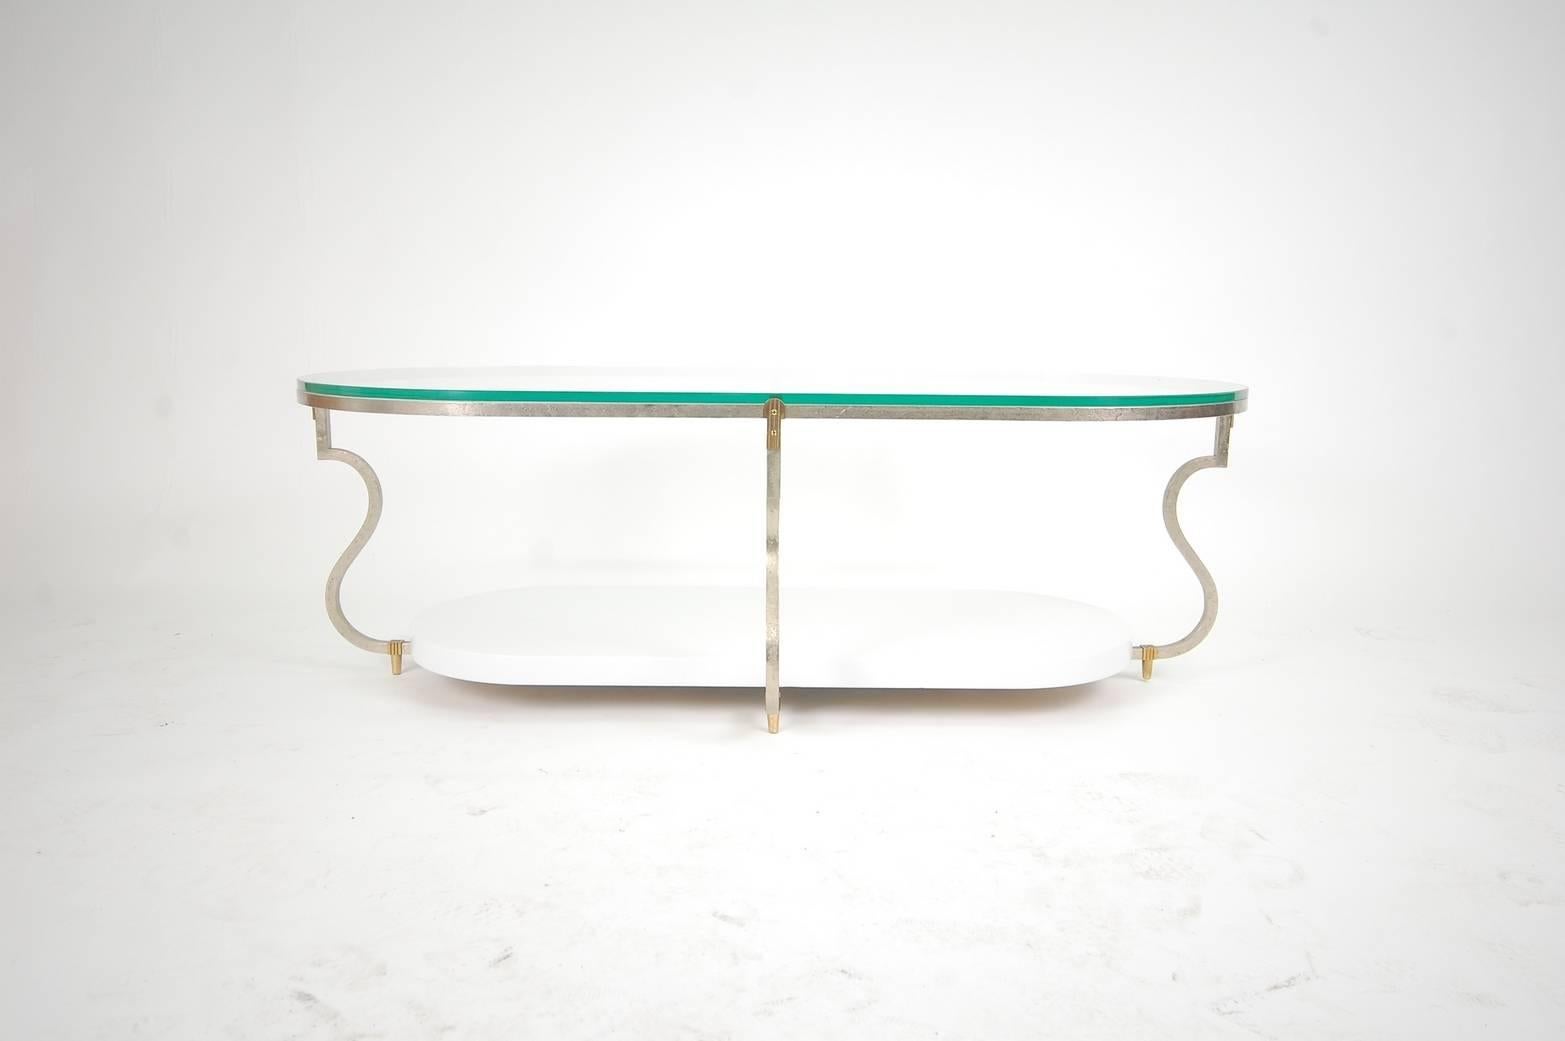 Elegant obround cocktail table designed by Tommi Parzinger for Parzinger Originals, circa 1966. Table consists of a hand-wrought, silvered steel frame, with handmade, solid brass hardware, a white lacquered lower shelf and a glass top.

We offer